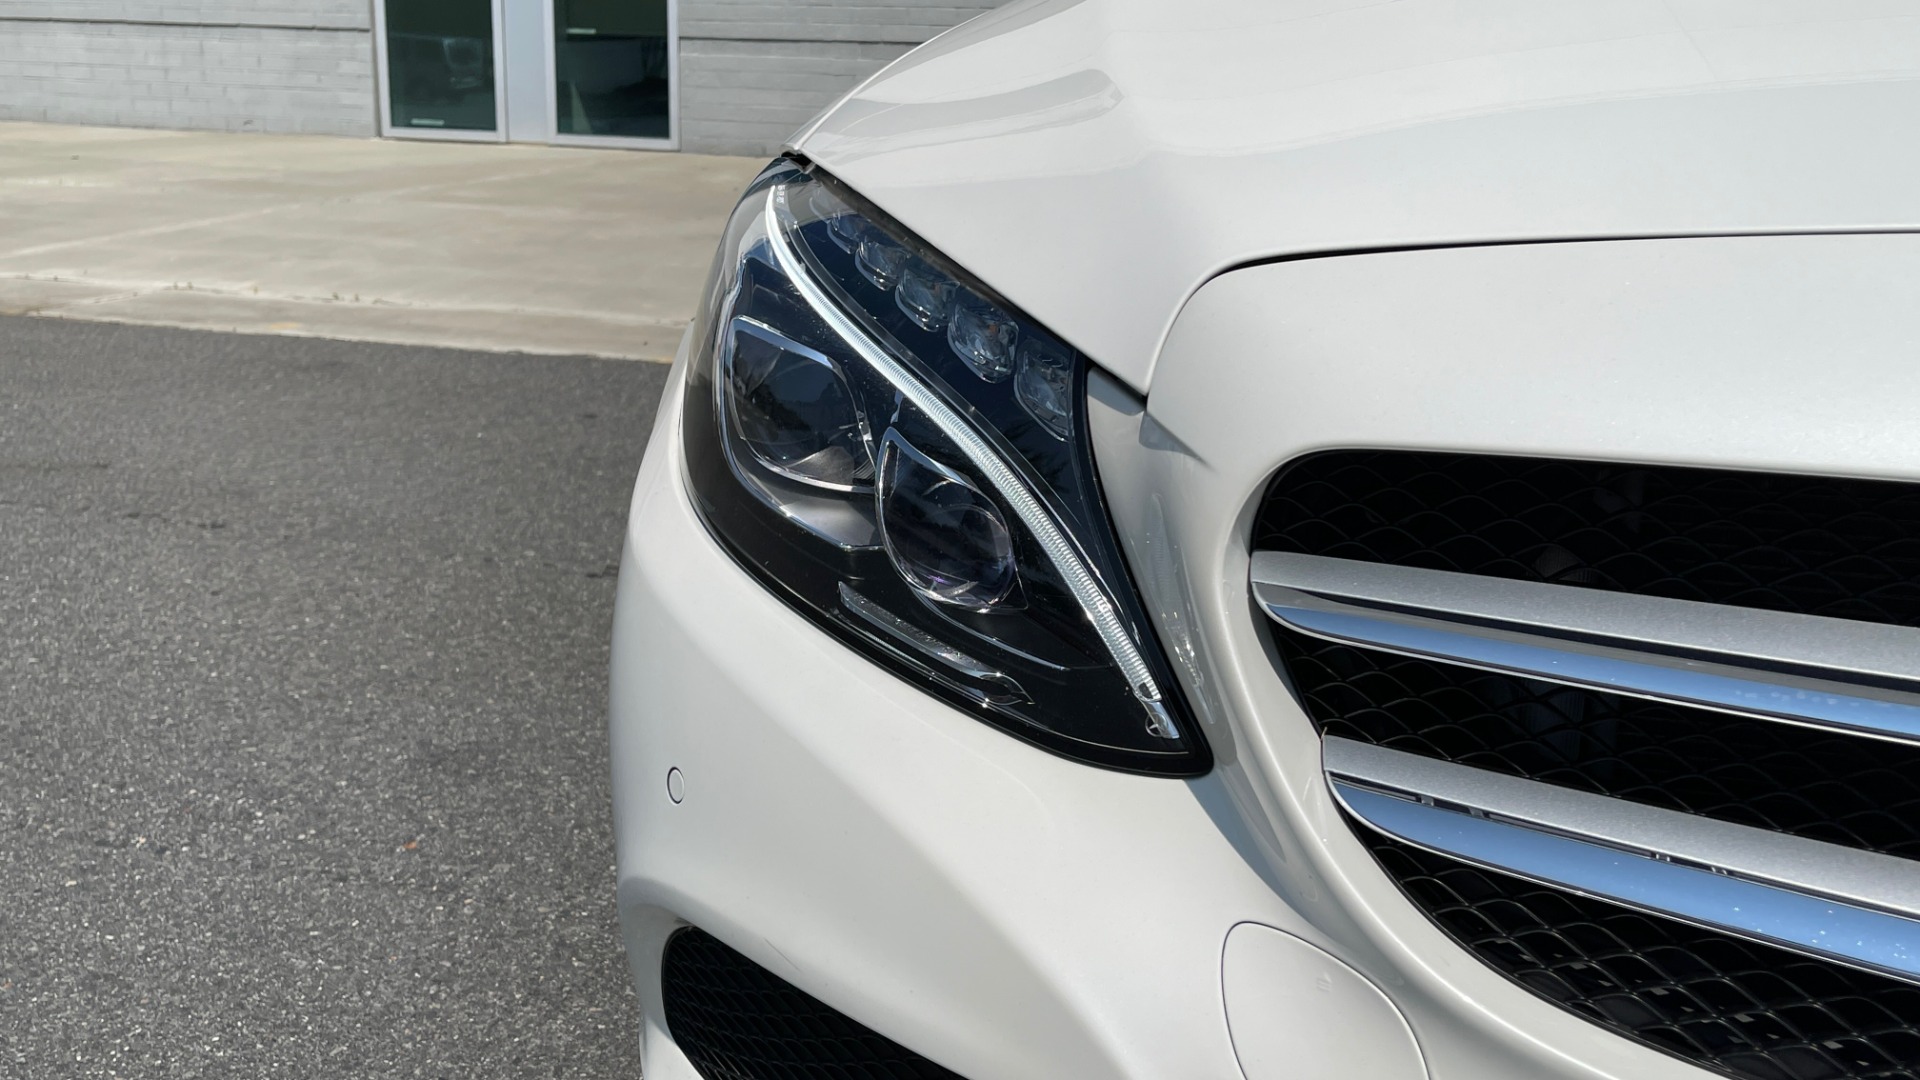 Used 2016 Mercedes-Benz C-CLASS C 300 4MATIC PREMIUM / BSA / MULTI MEDIA PKG / LIGHTING / REARVIEW for sale Sold at Formula Imports in Charlotte NC 28227 11